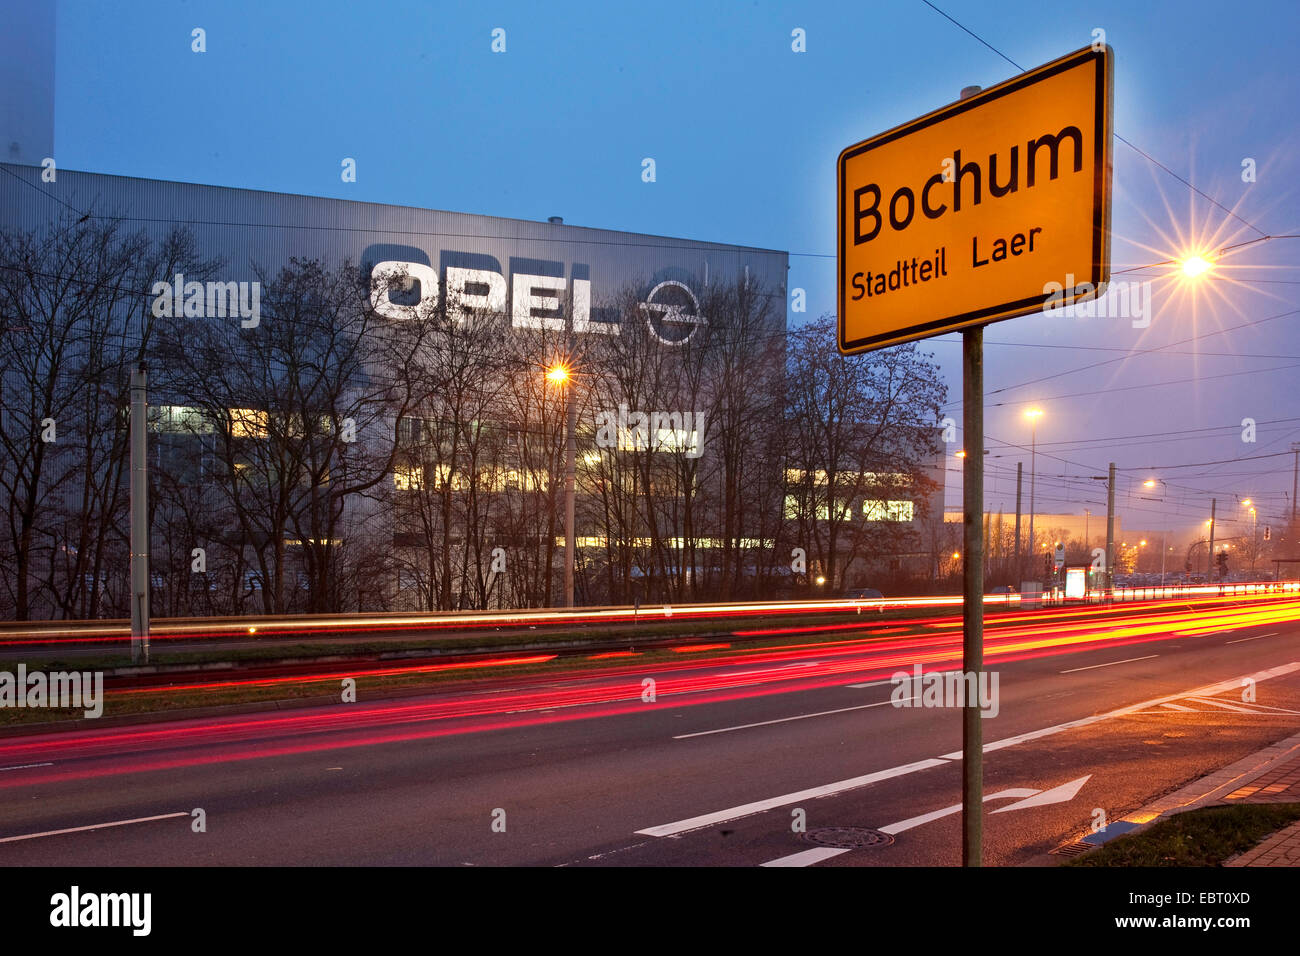 Opel factory and place name sign on Bochum in evening light, Germany, North Rhine-Westphalia, Ruhr Area, Bochum Stock Photo